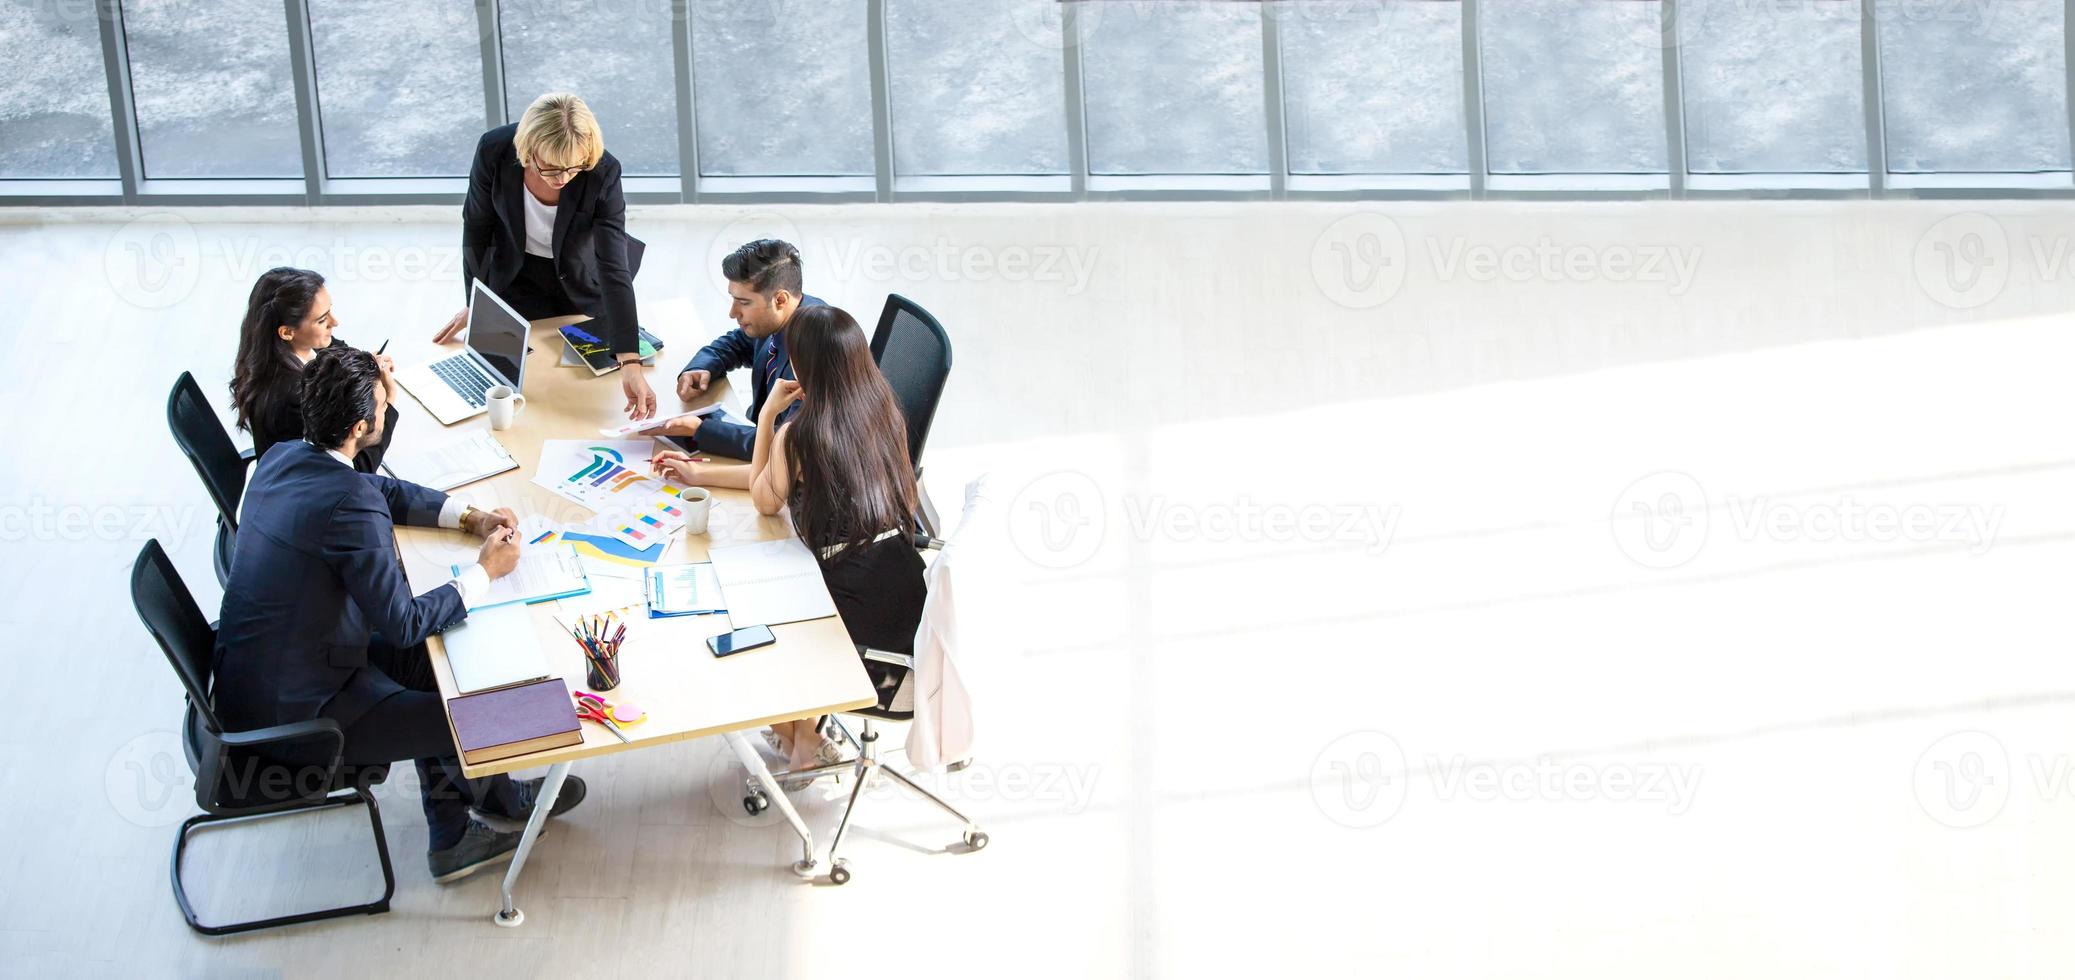 Top view of group of multiethnic busy people working in an office, Aerial view with businessman and businesswoman sitting around a conference table with copy space, Business meeting concept. photo